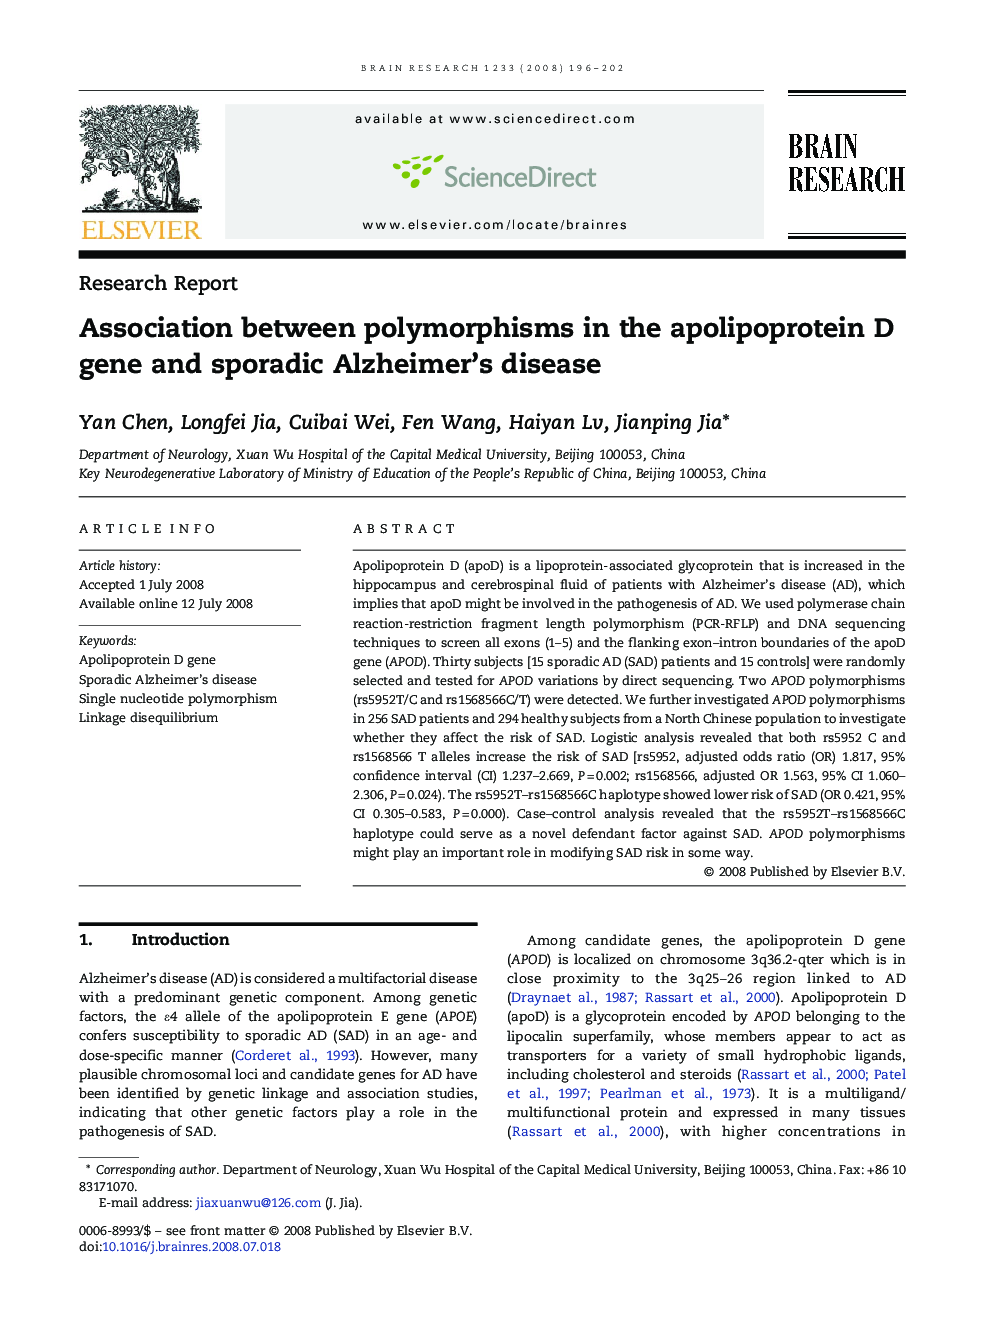 Association between polymorphisms in the apolipoprotein D gene and sporadic Alzheimer's disease